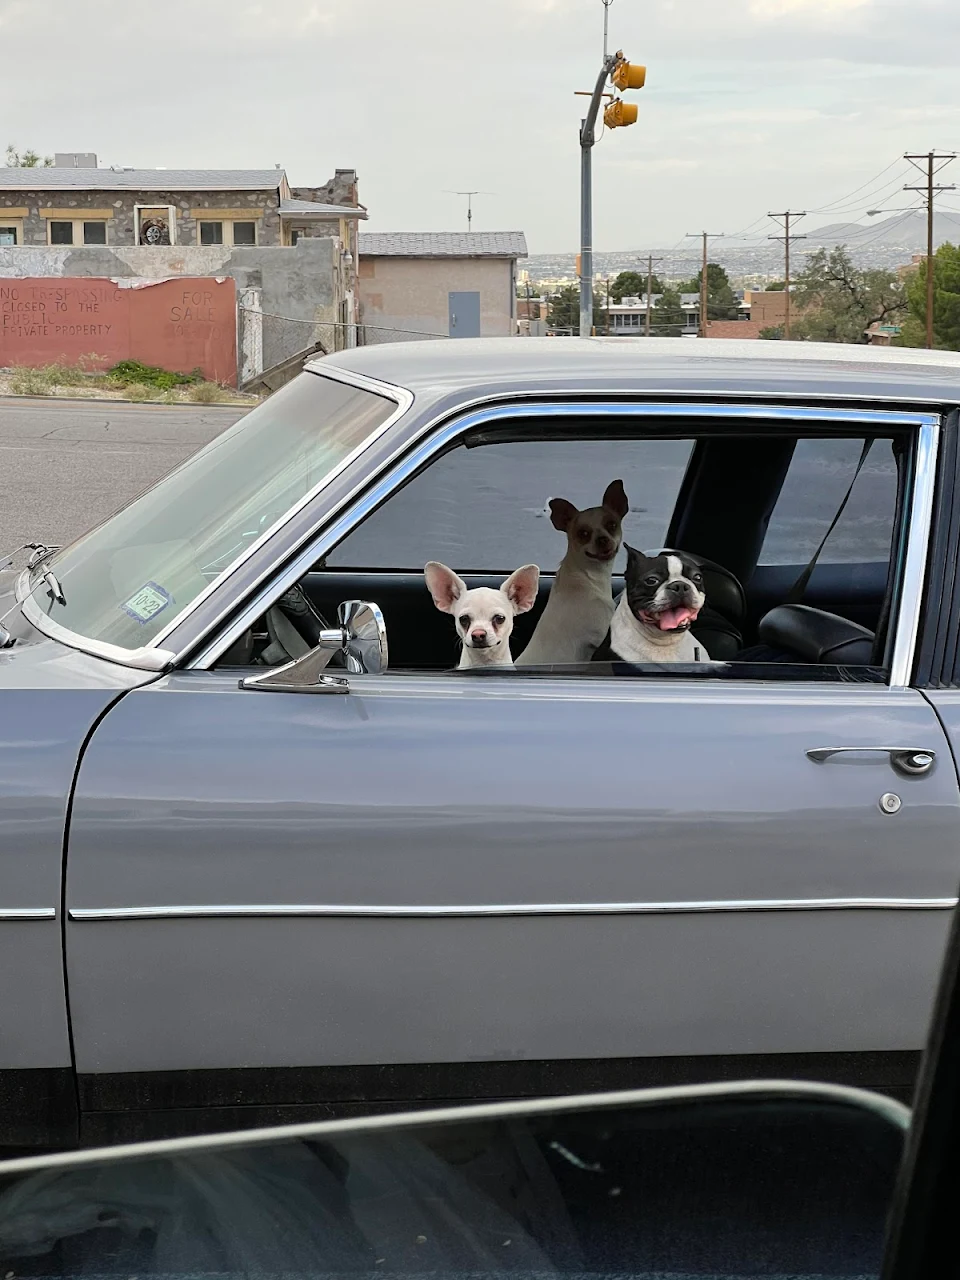 These good doggos at the gas station